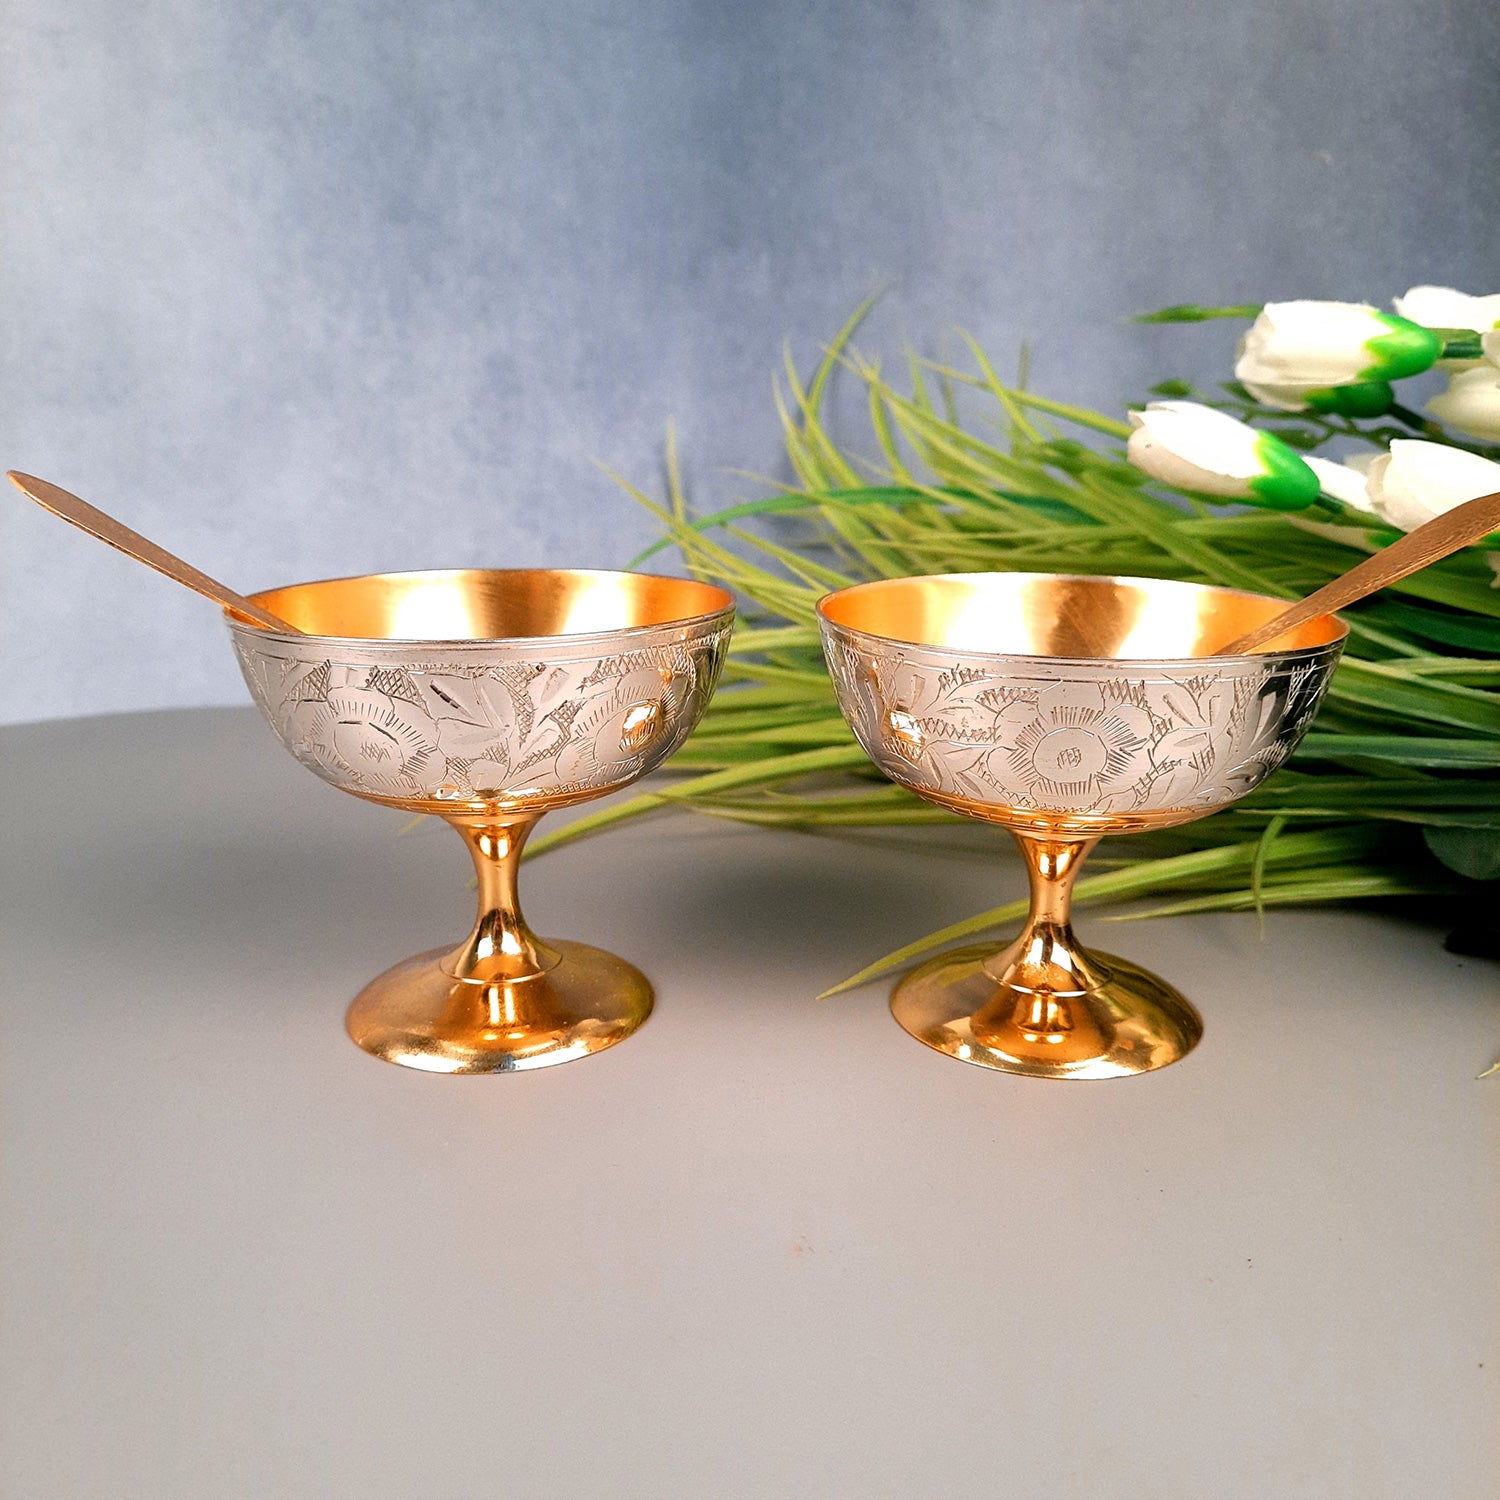 INTERNATIONAL GIFT Brass Serving Bowl German Golden Brass Bowl Set With  Spoon With Royal Luxury Velvet Box Packing Price in India - Buy  INTERNATIONAL GIFT Brass Serving Bowl German Golden Brass Bowl